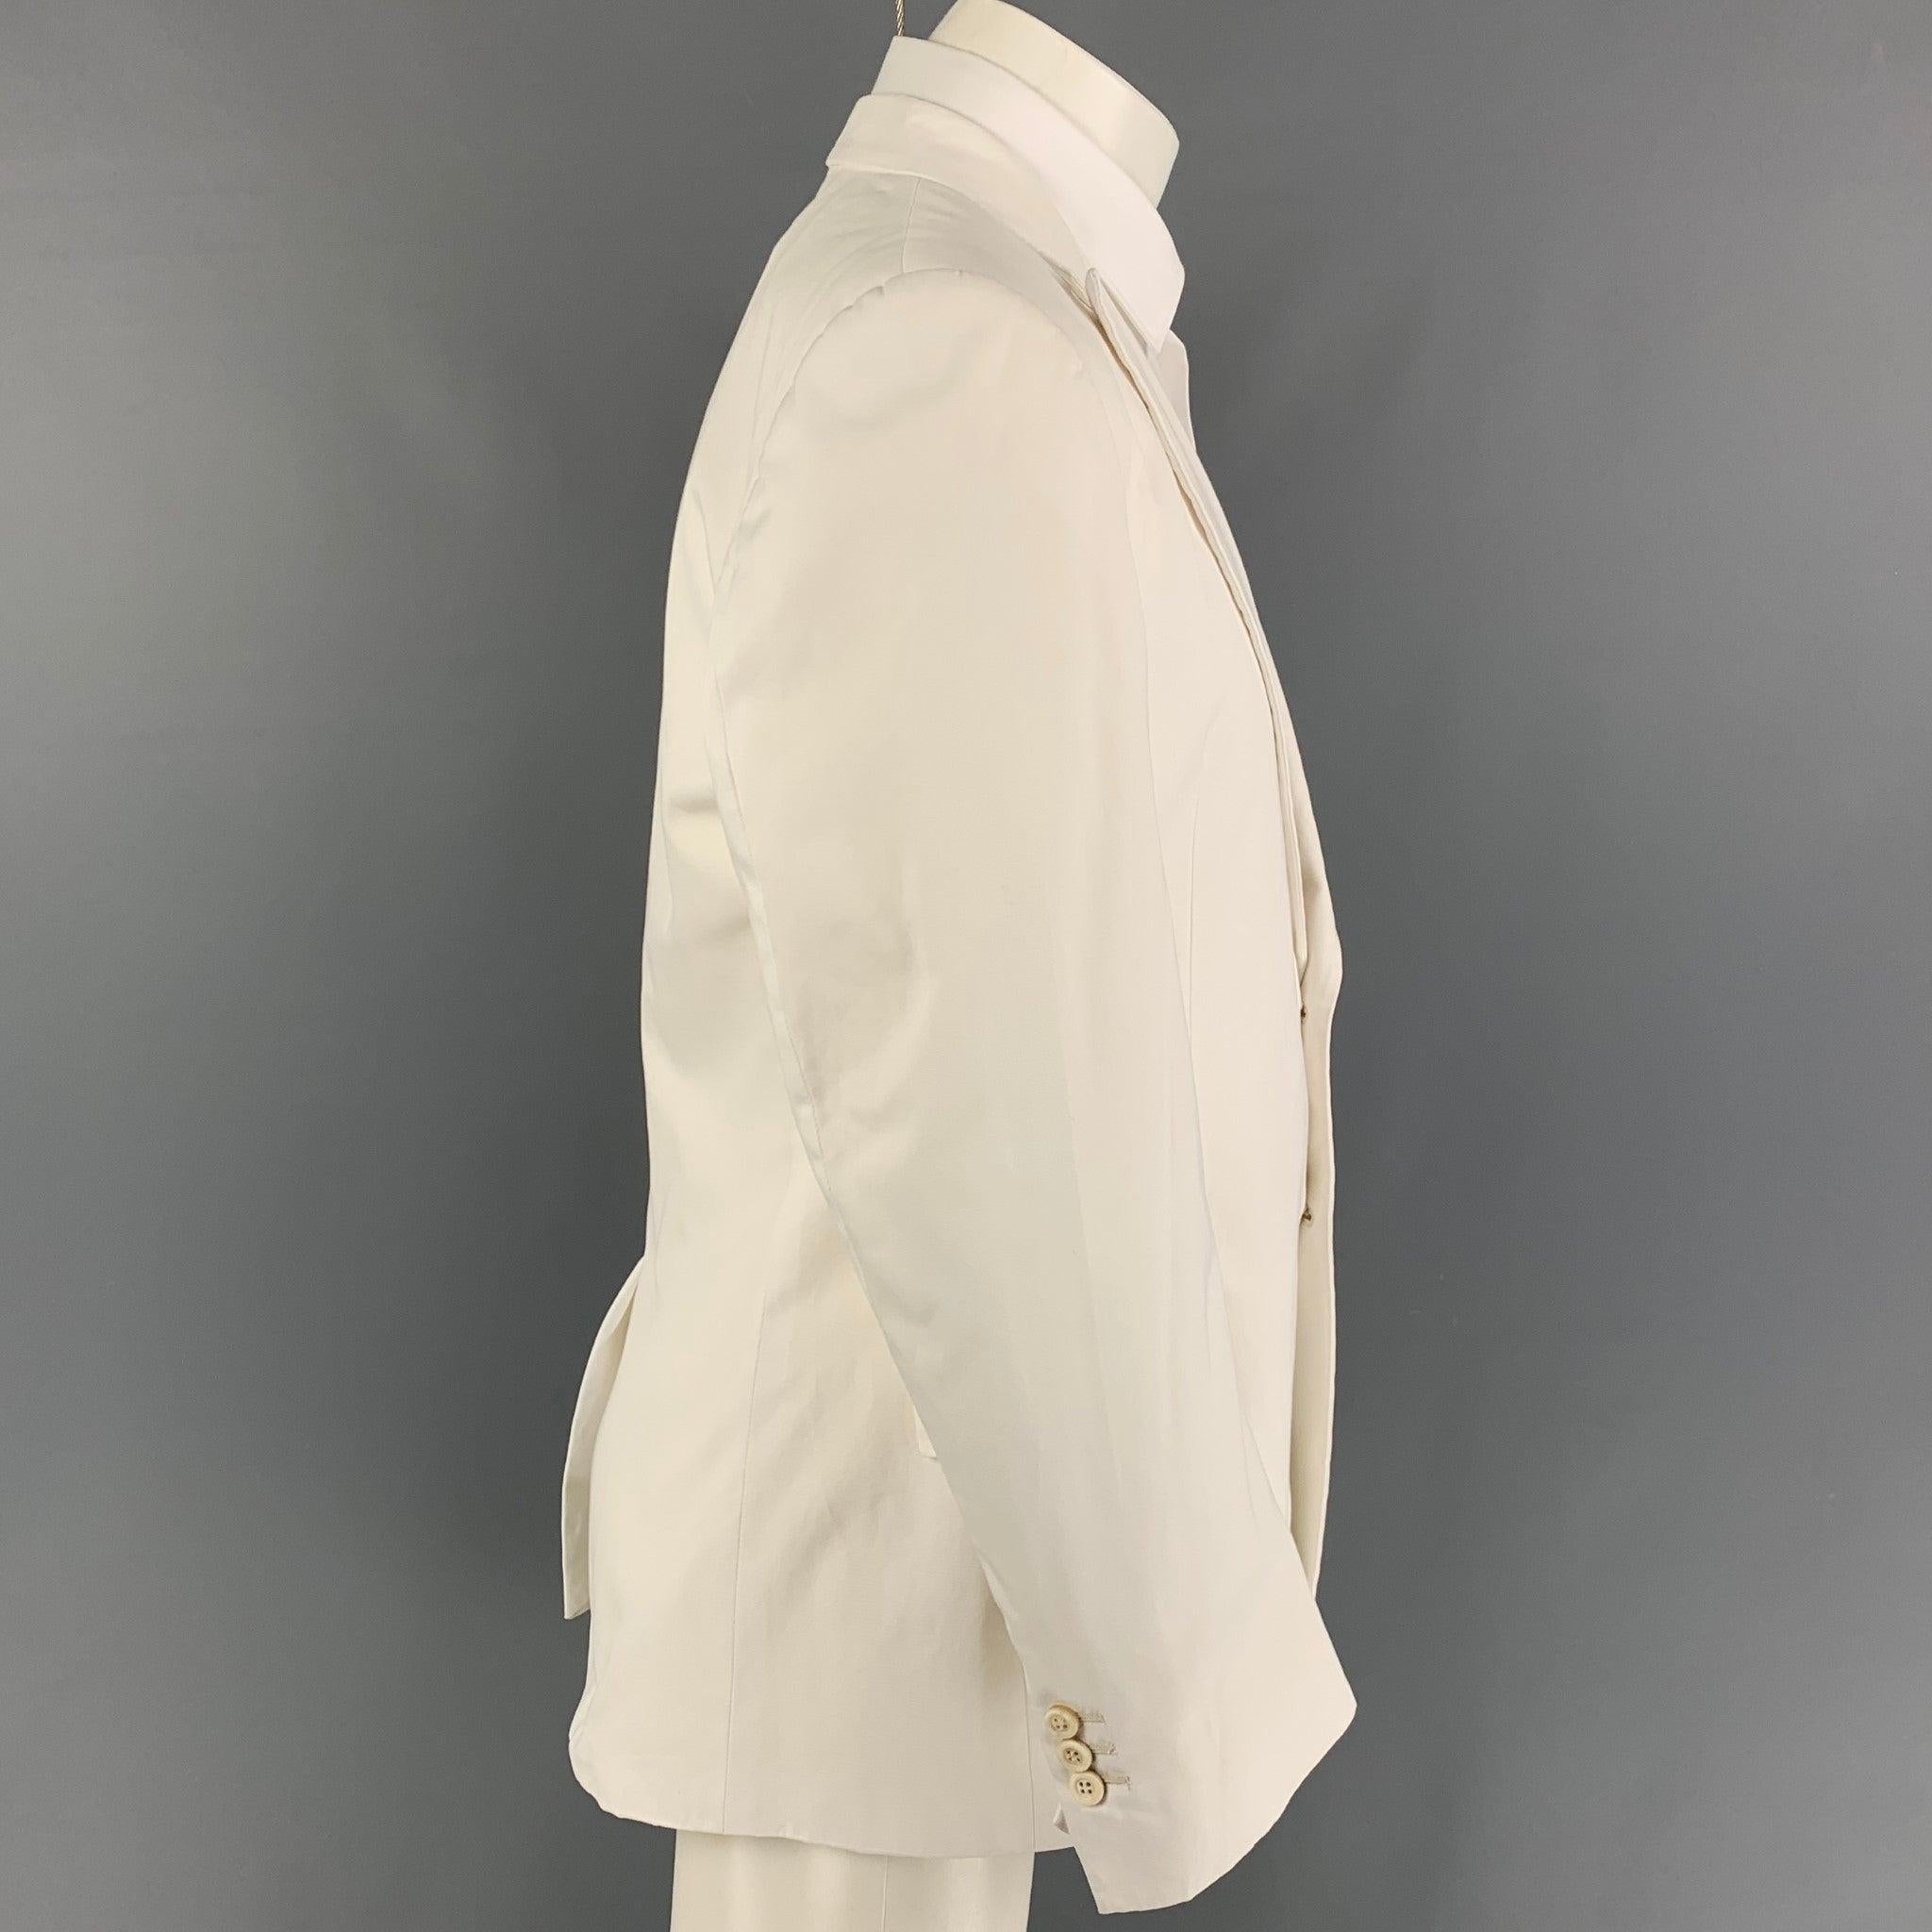 YVES SAINT LAURENT sport coat comes in a white cotton with a full liner featuring a peak lapel, flap pockets, single back vent, and a double button closure. Made in Italy.
Very Good
Pre-Owned Condition. 

Marked:   50 R  

Measurements: 
 
Shoulder: